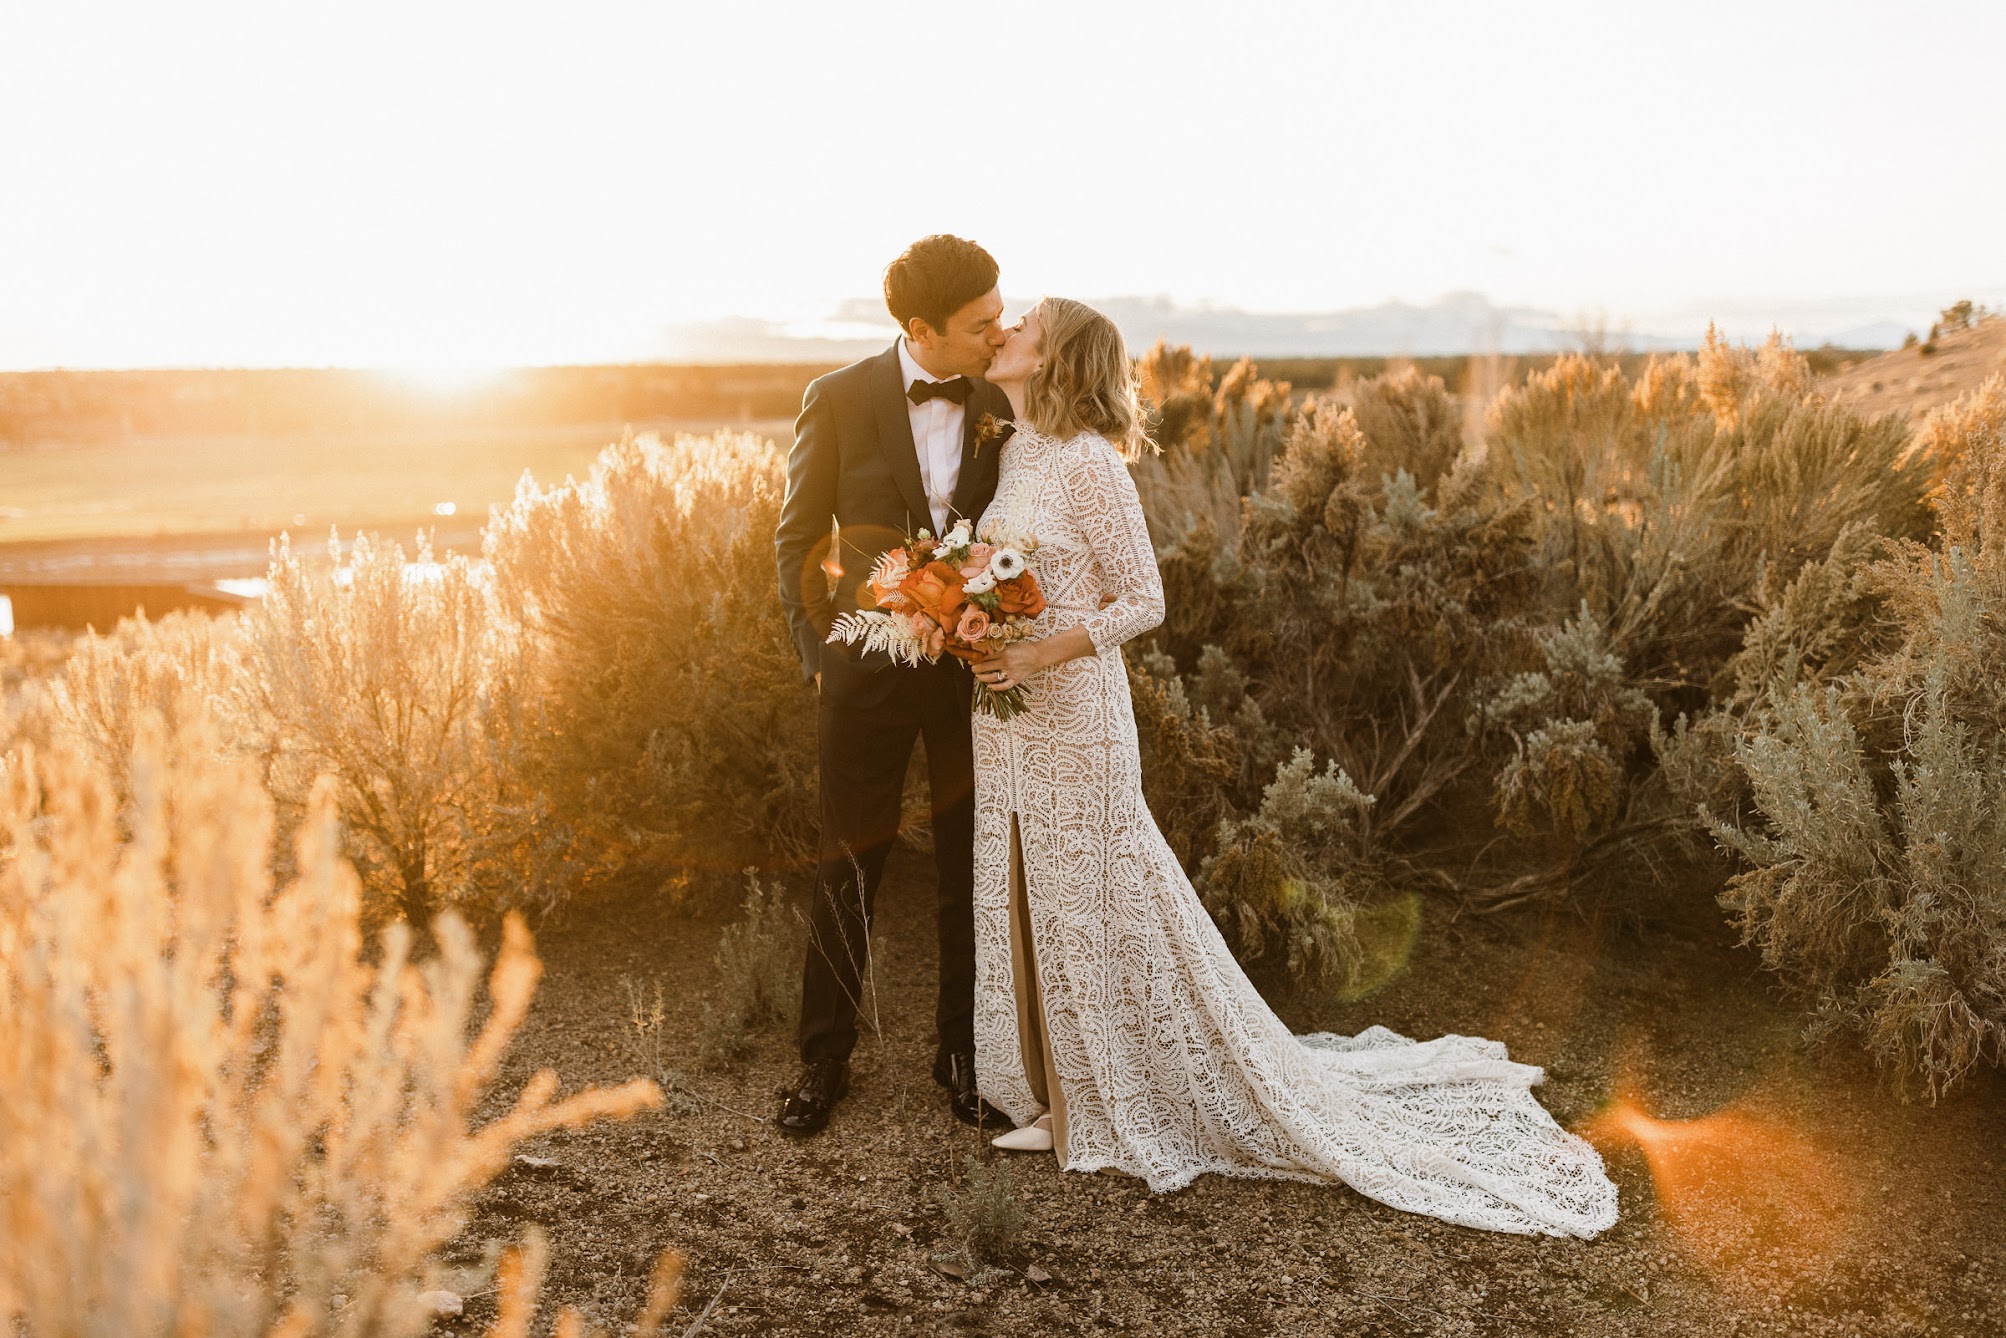 Stunning sunset photos. The bride and groom are kissing in a field surrounded by dried bushes. Behind them is open farm land and the sunsetting.  